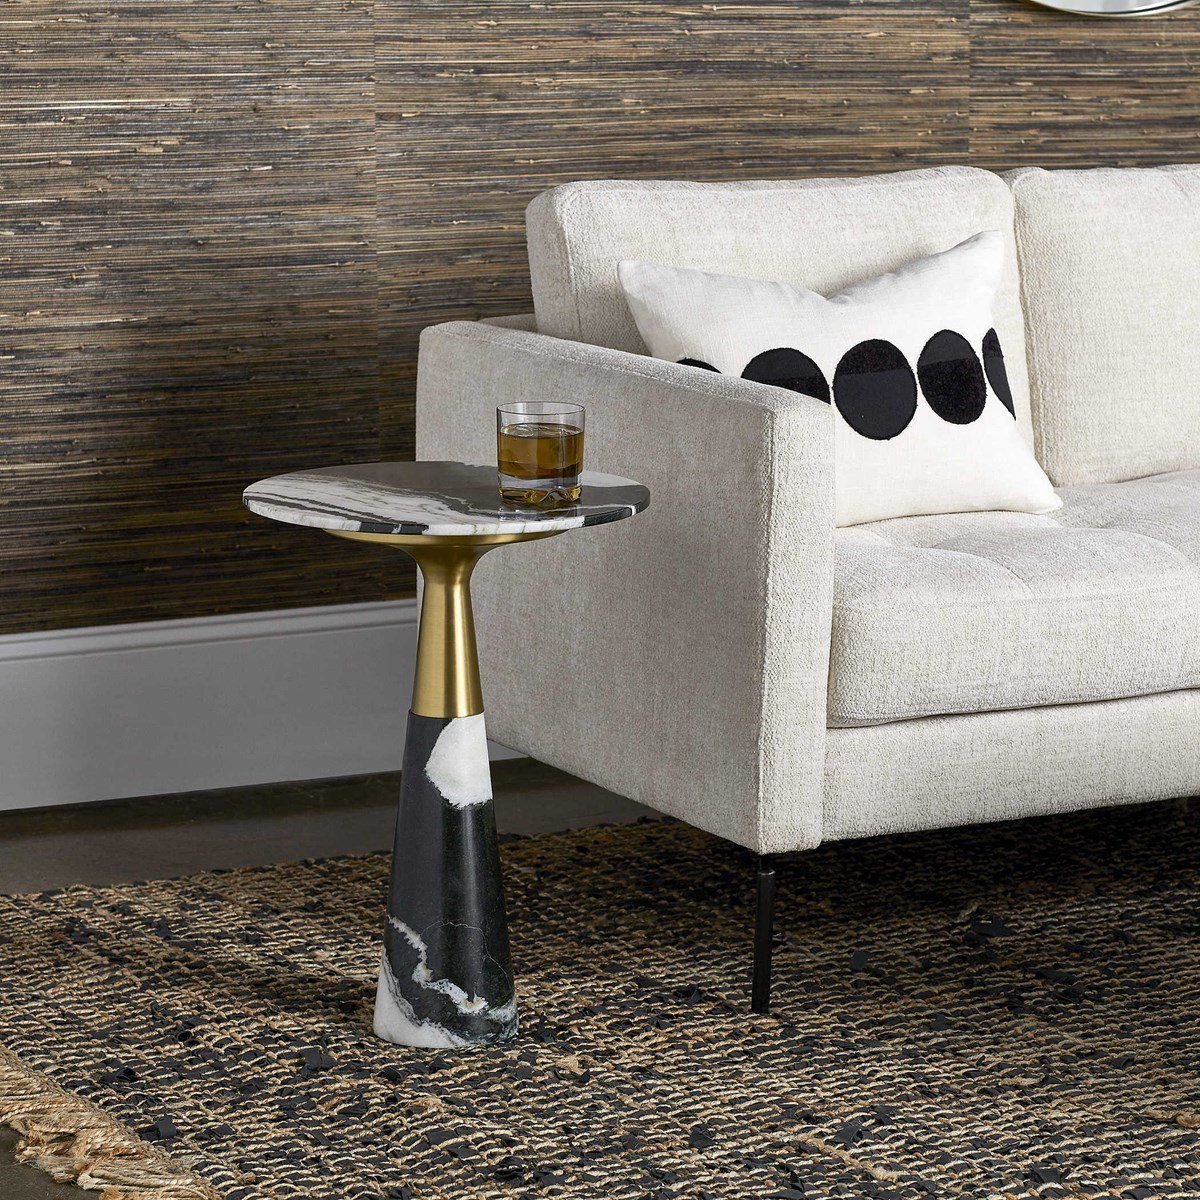 Mixed marble and brass looks chic in this retro-modern side table